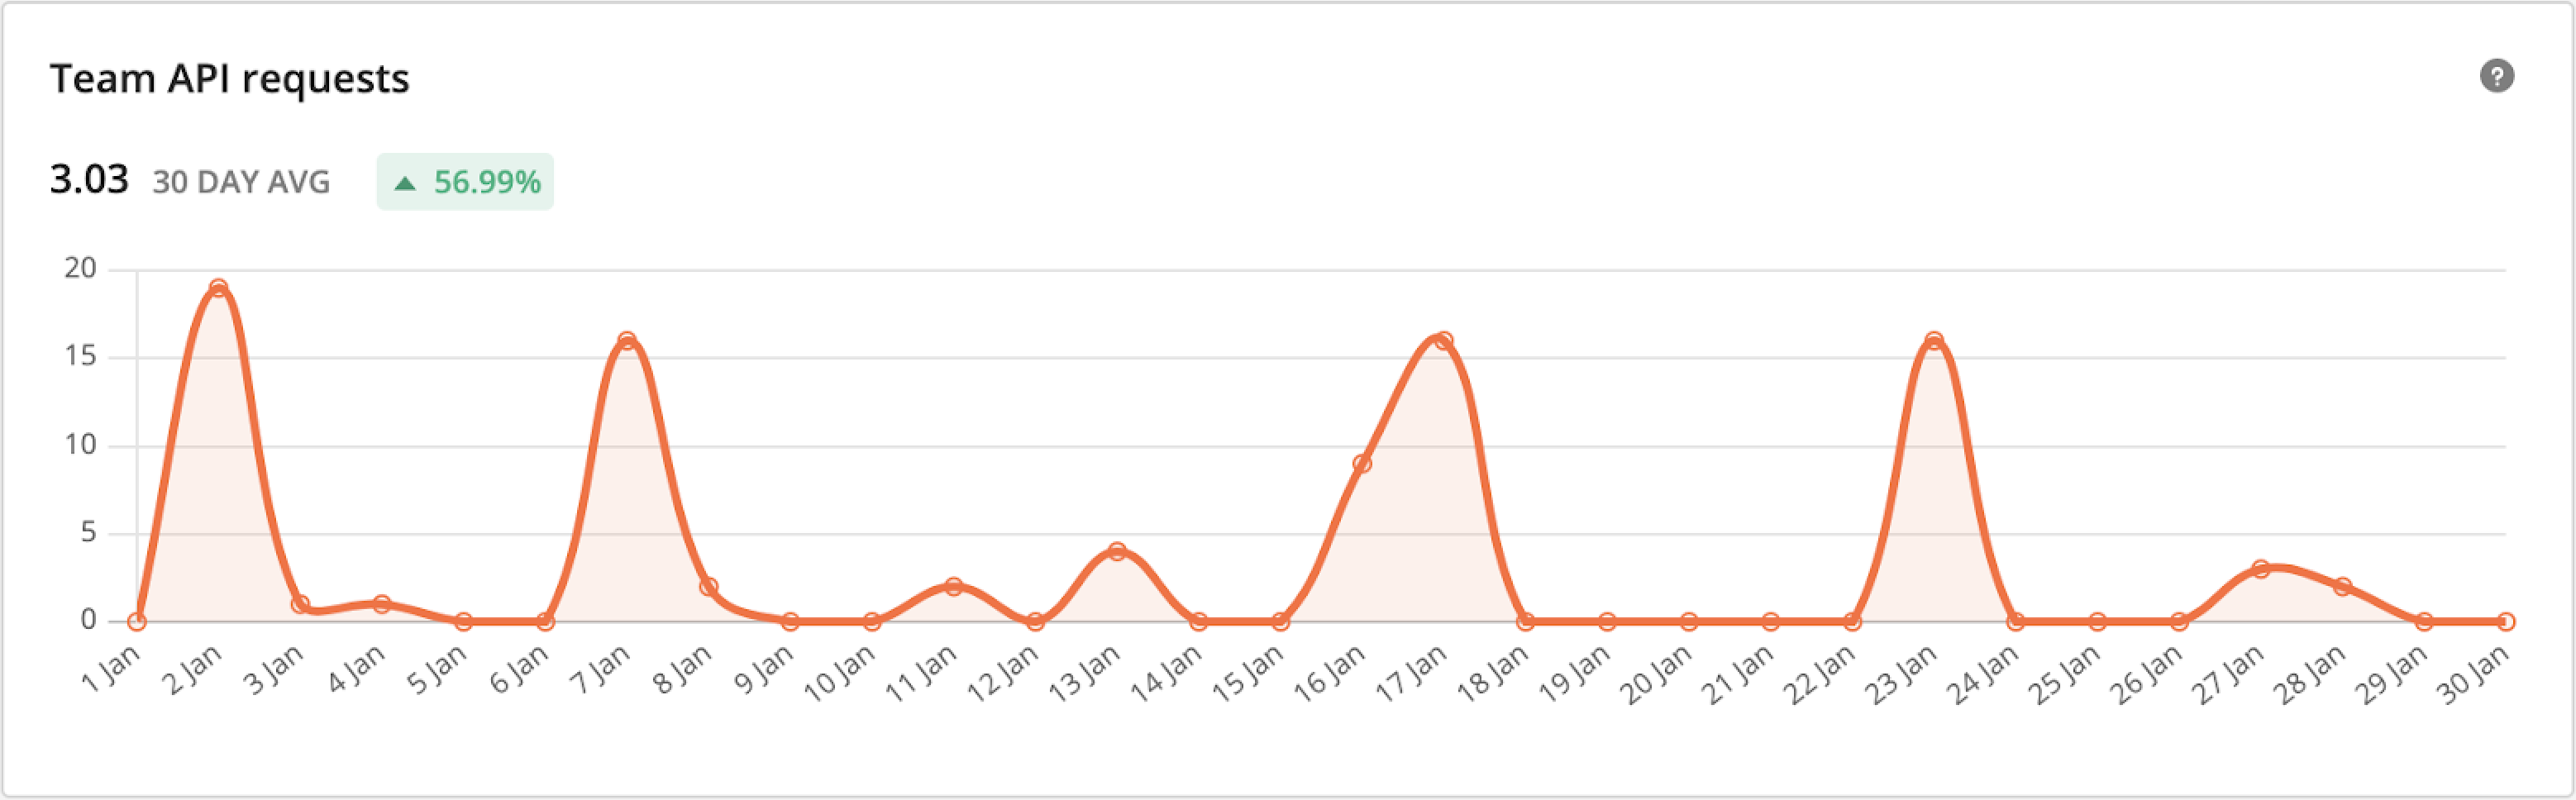 Team API requests over 30 day average example. Graph.